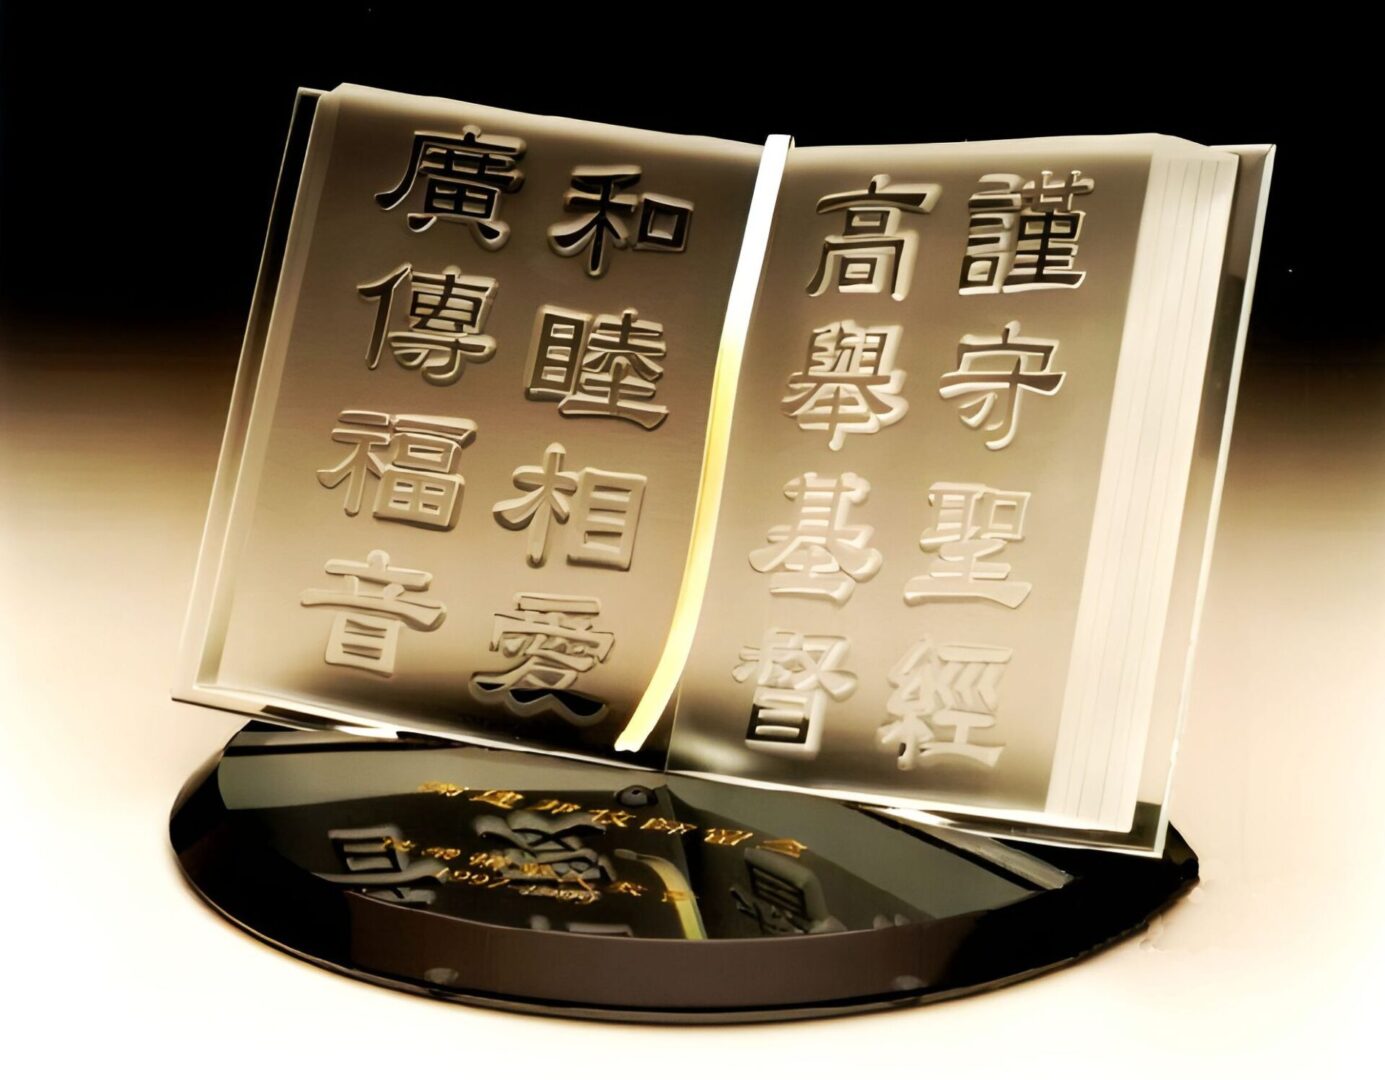 A book with chinese writing on it